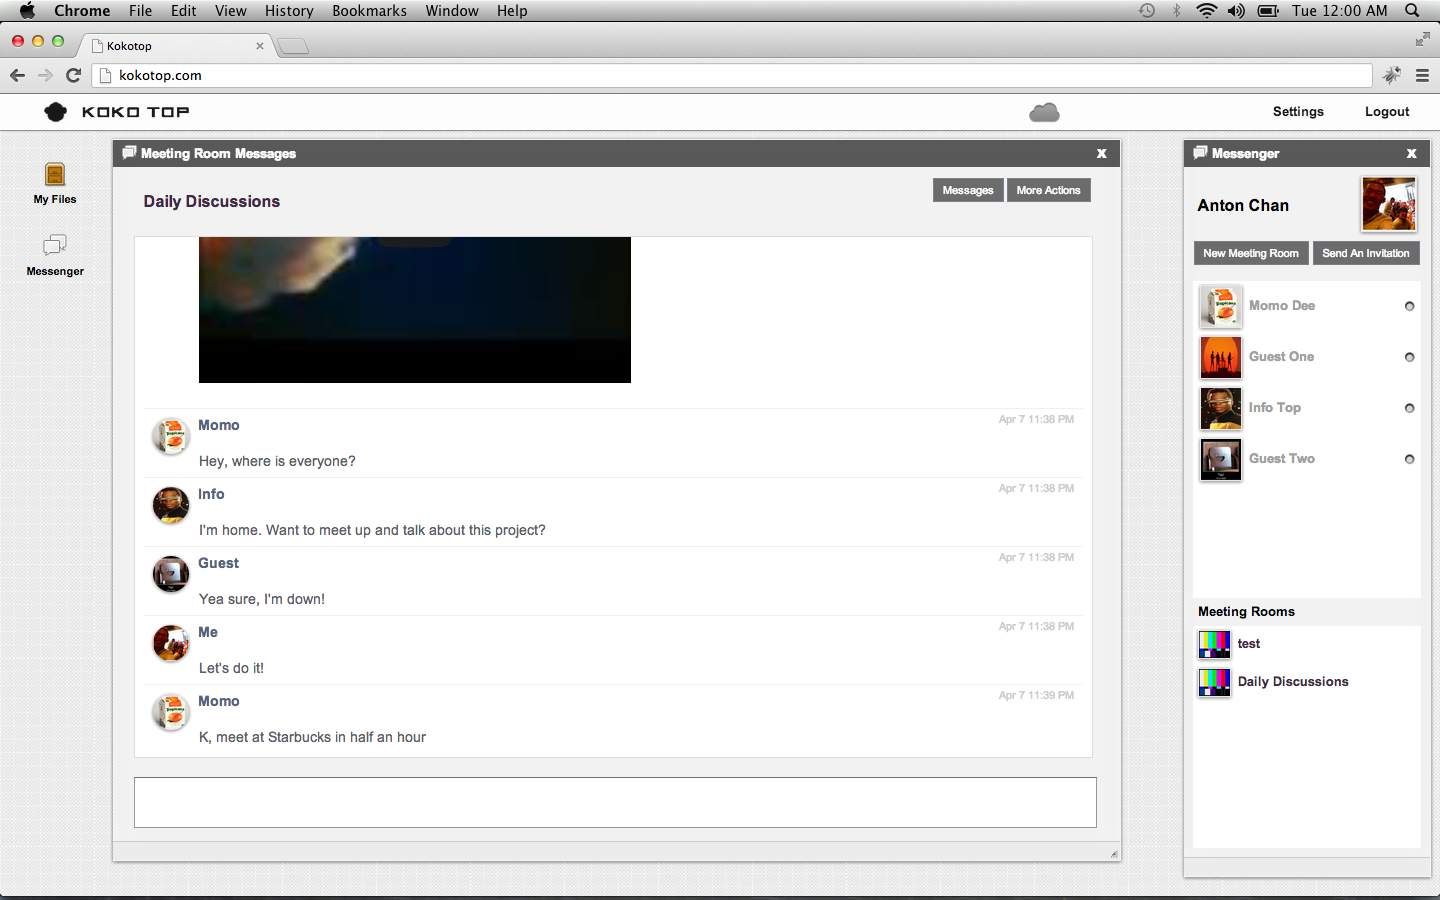 You can also create chatrooms and have group discussions